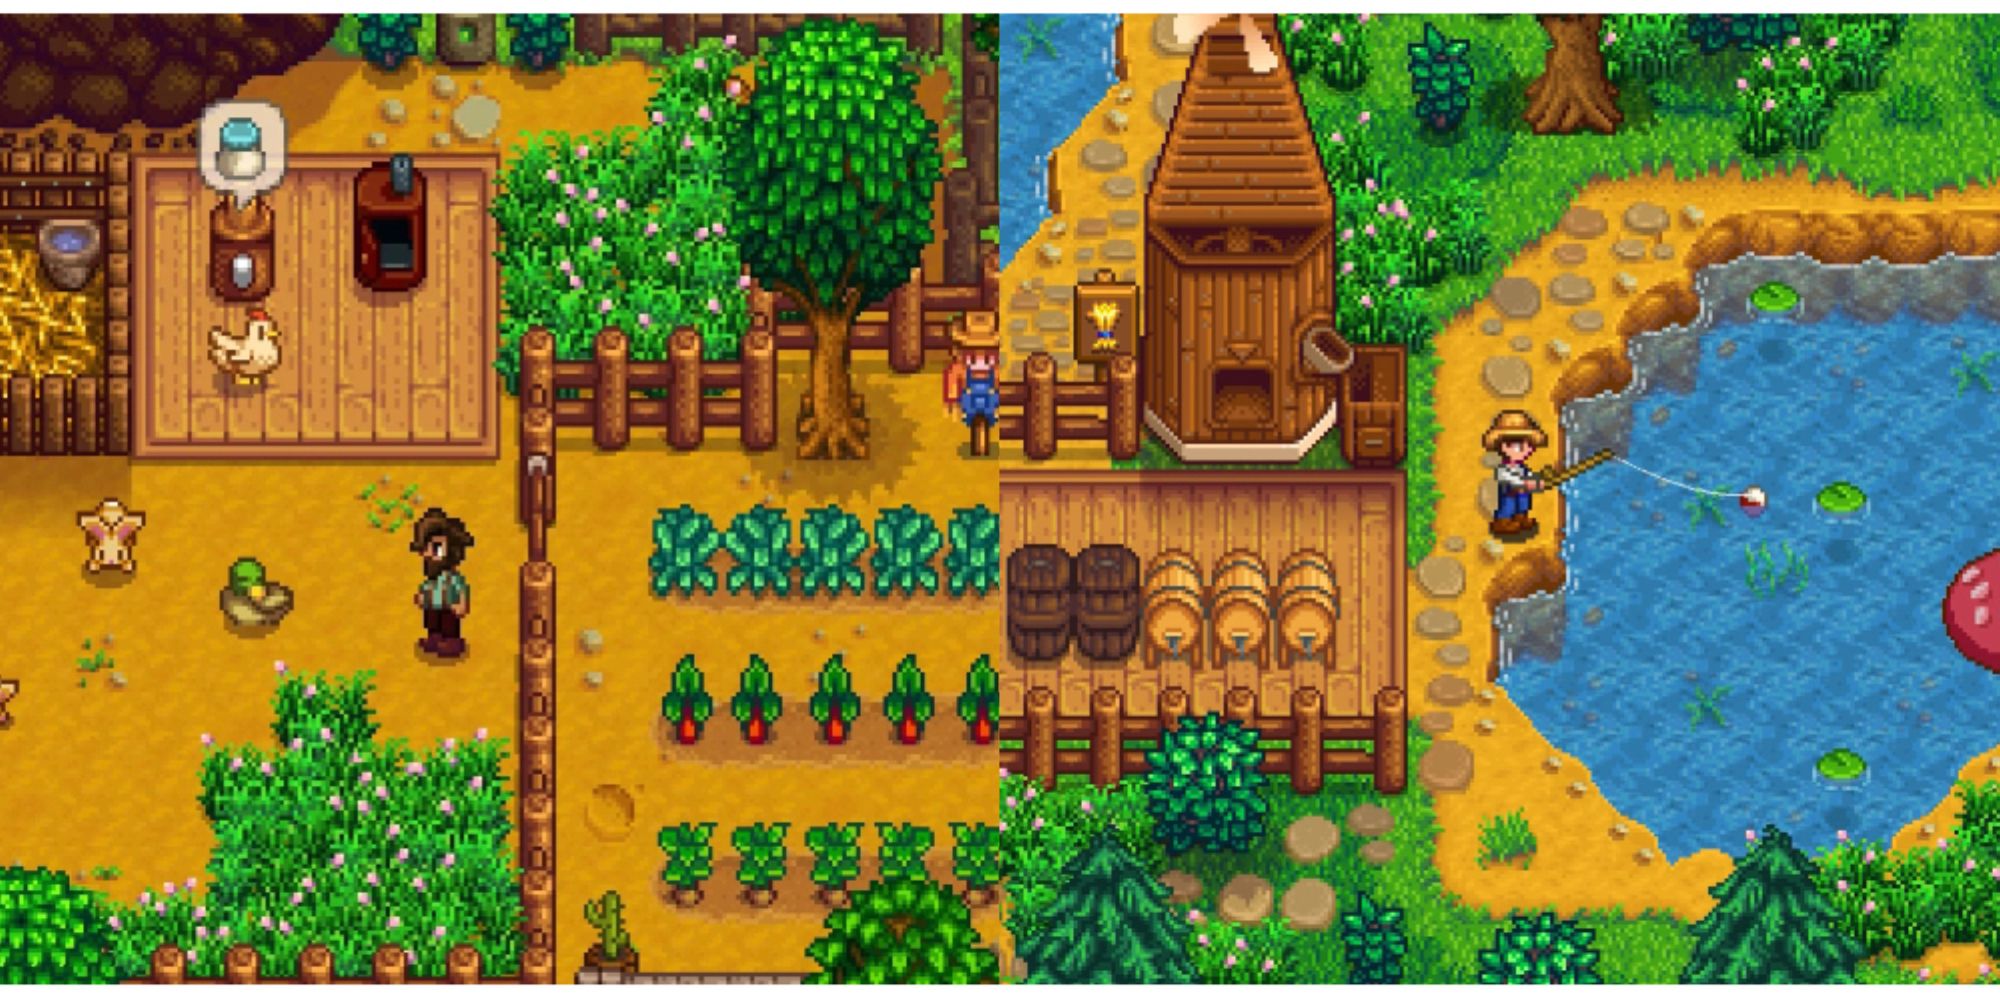 Stardew Valley Co-Op Review (Makeshift Multiplayer Mod) 